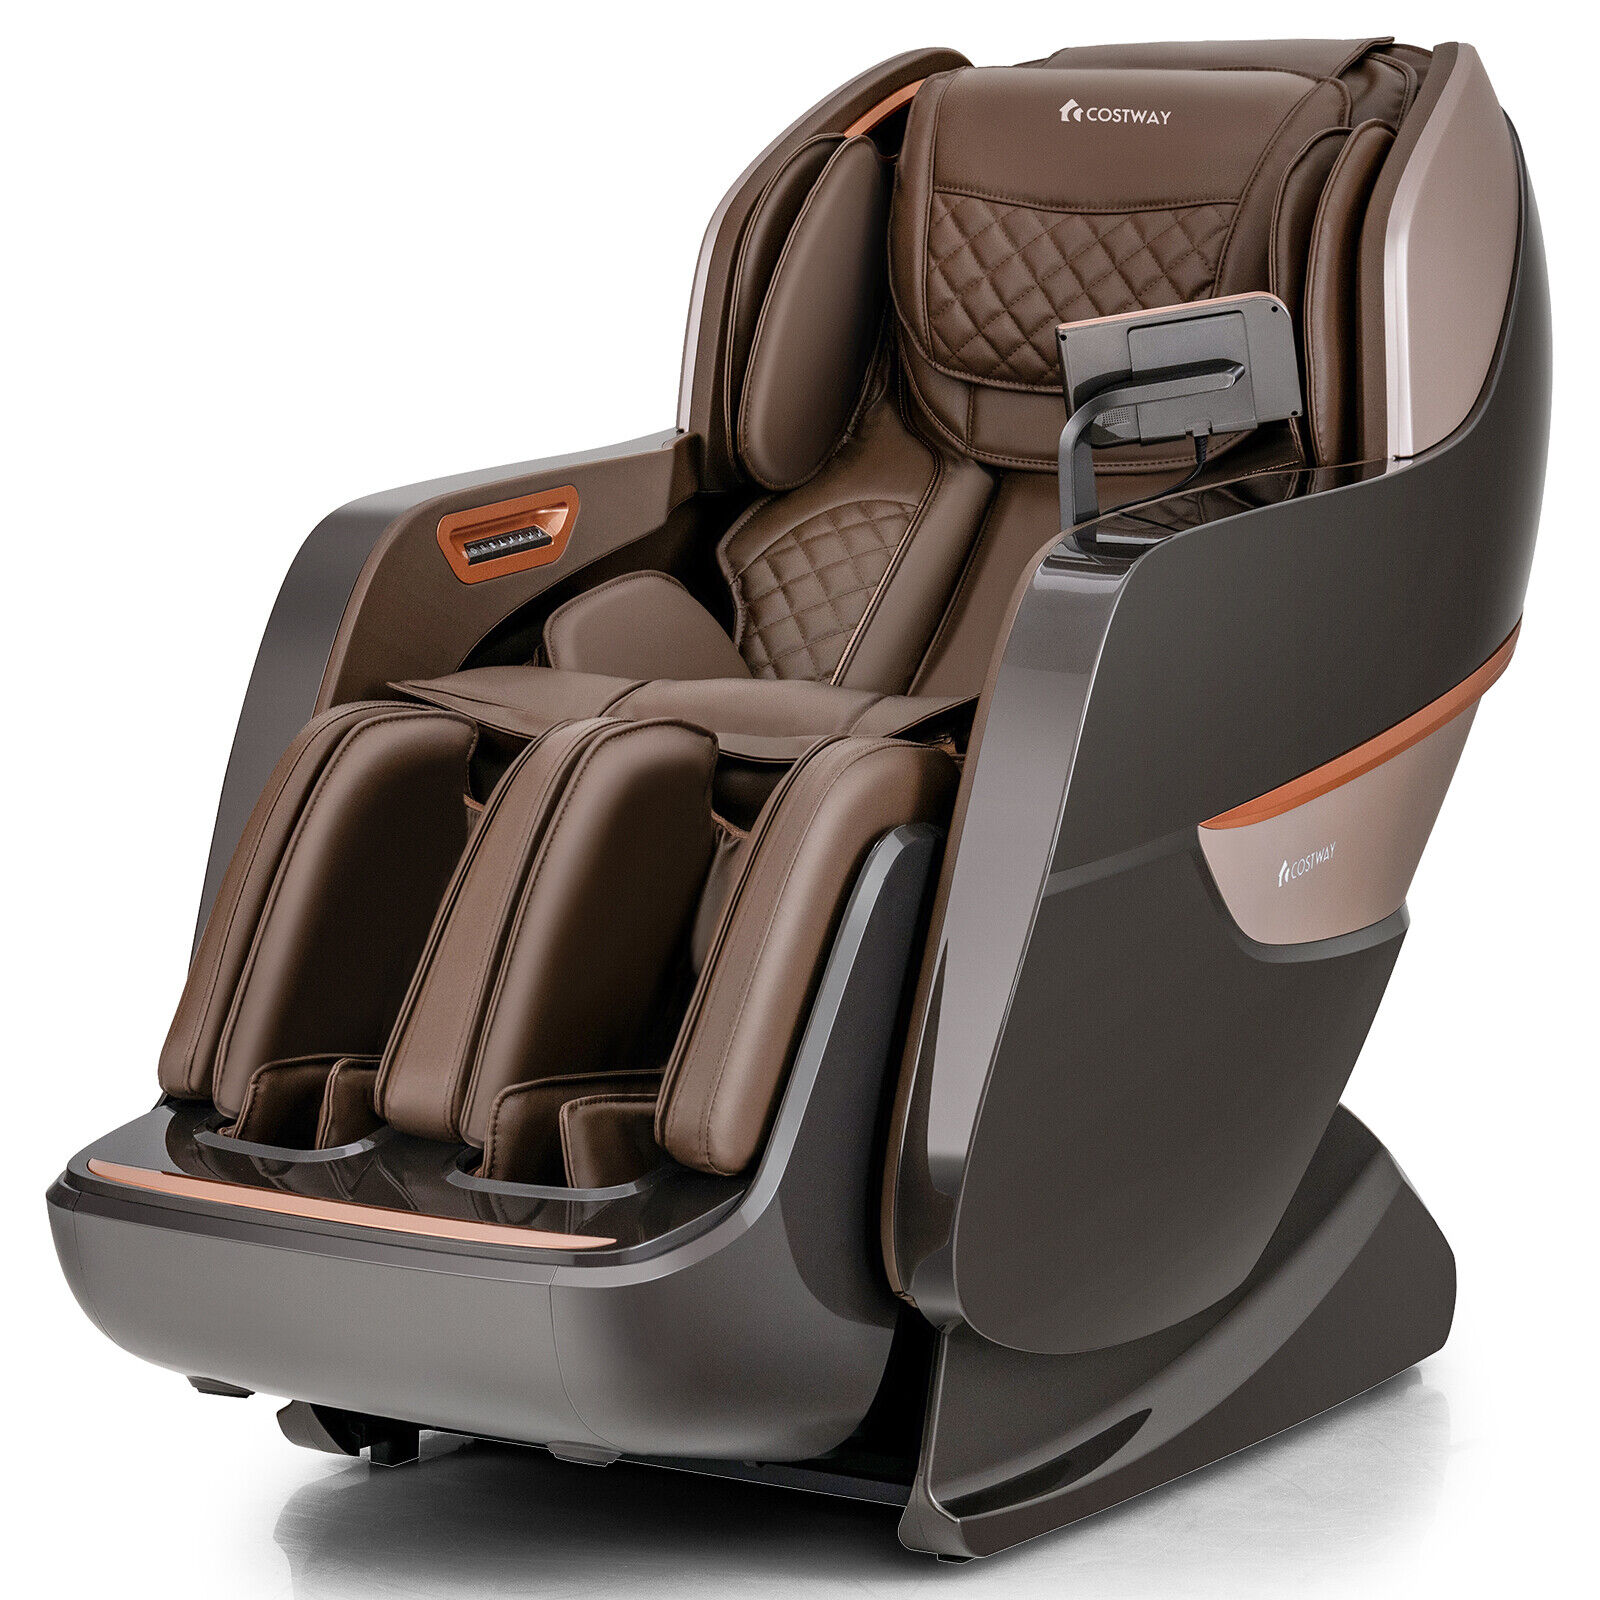 Great Choice Products Sl Track Massage Chair W/ 5 Massage Techniques 3 Adujstable Speeds & Widths